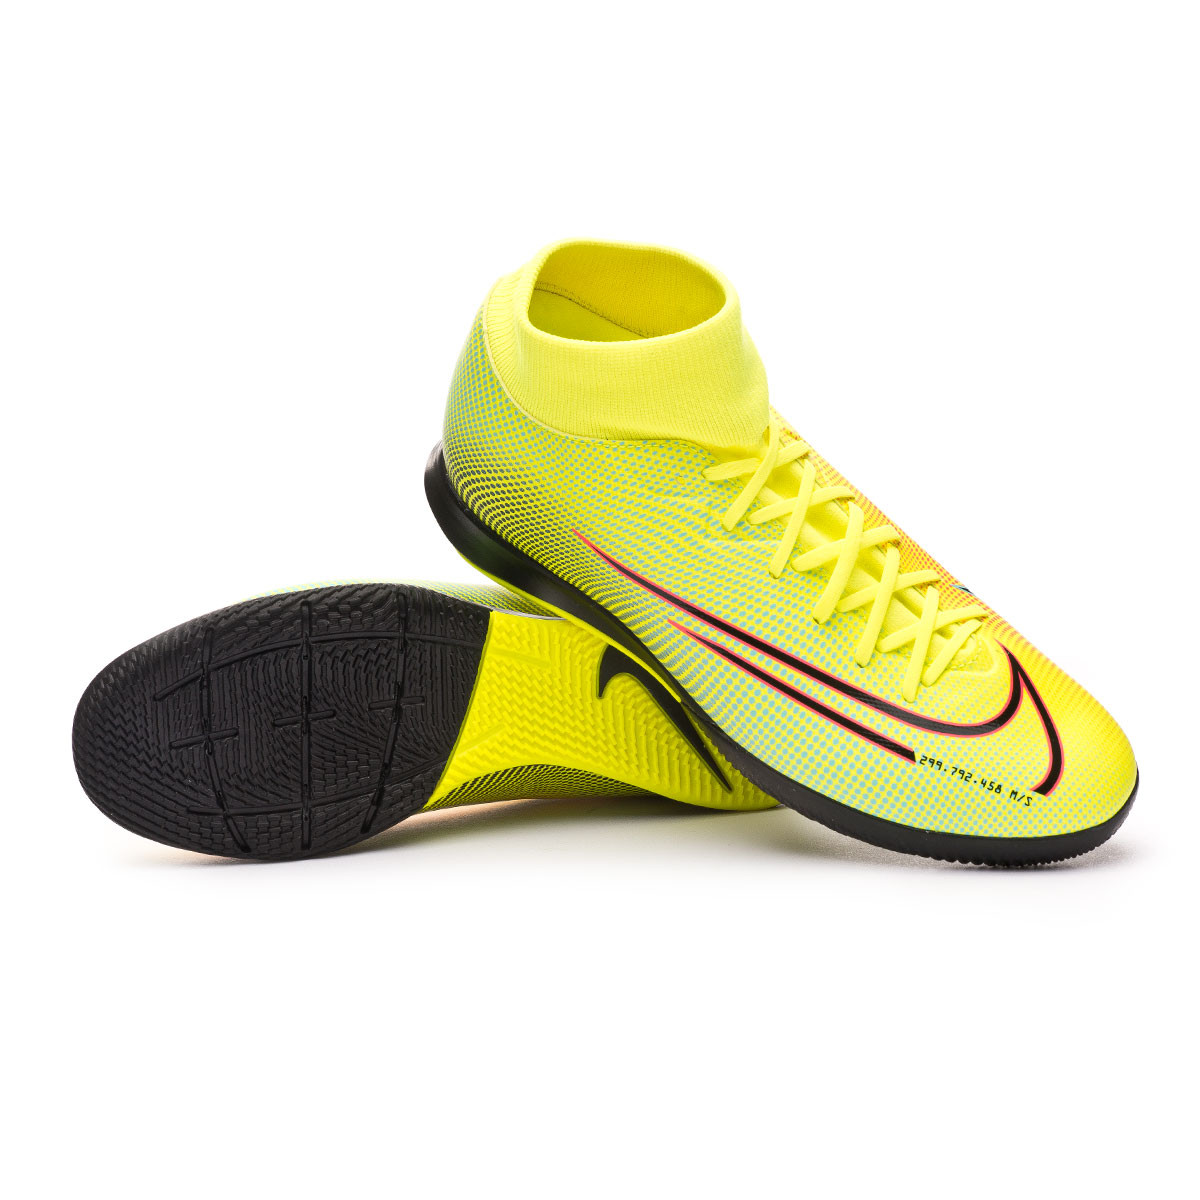 Nike Mercurial Superfly VI Academy GS soccer shoes.